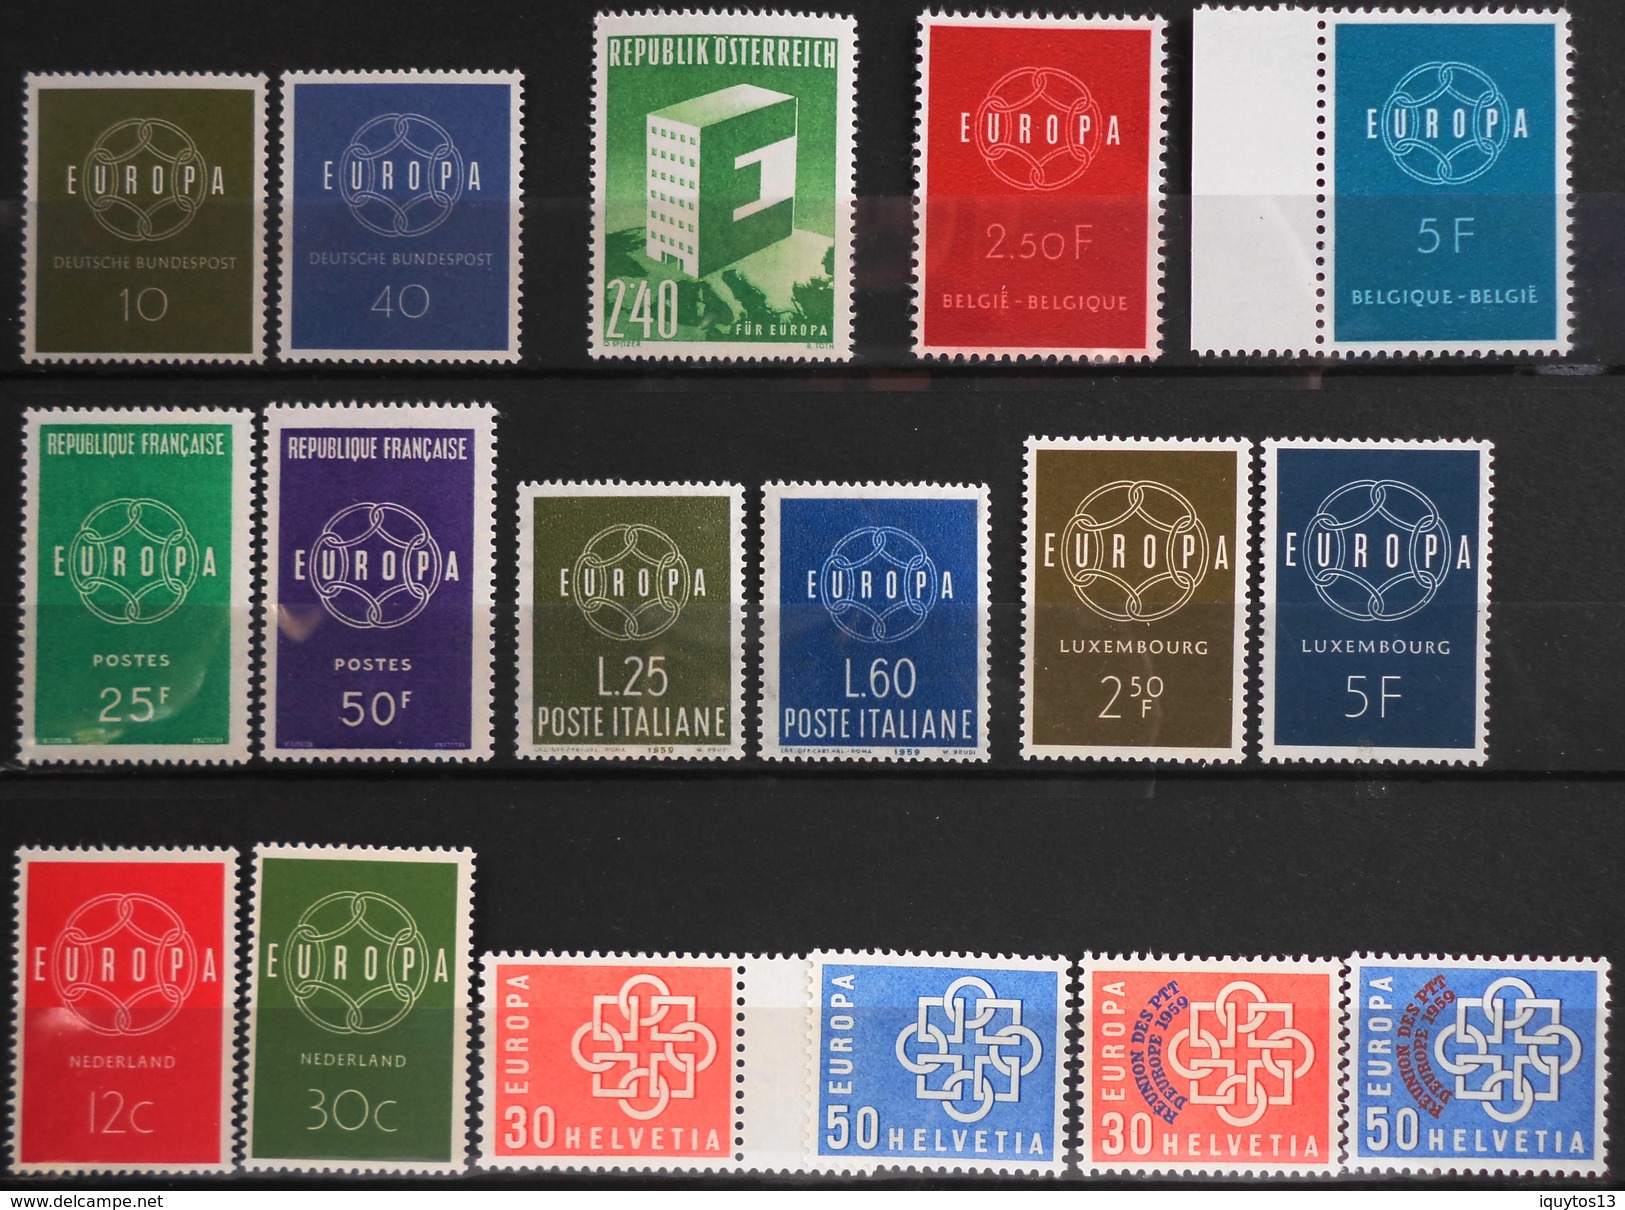 EUROPA ANNEE COMPLETE 1959 - 17 VALEURS TIMBRES NEUFS**qualité Irréprochable - Superbe - Full Years